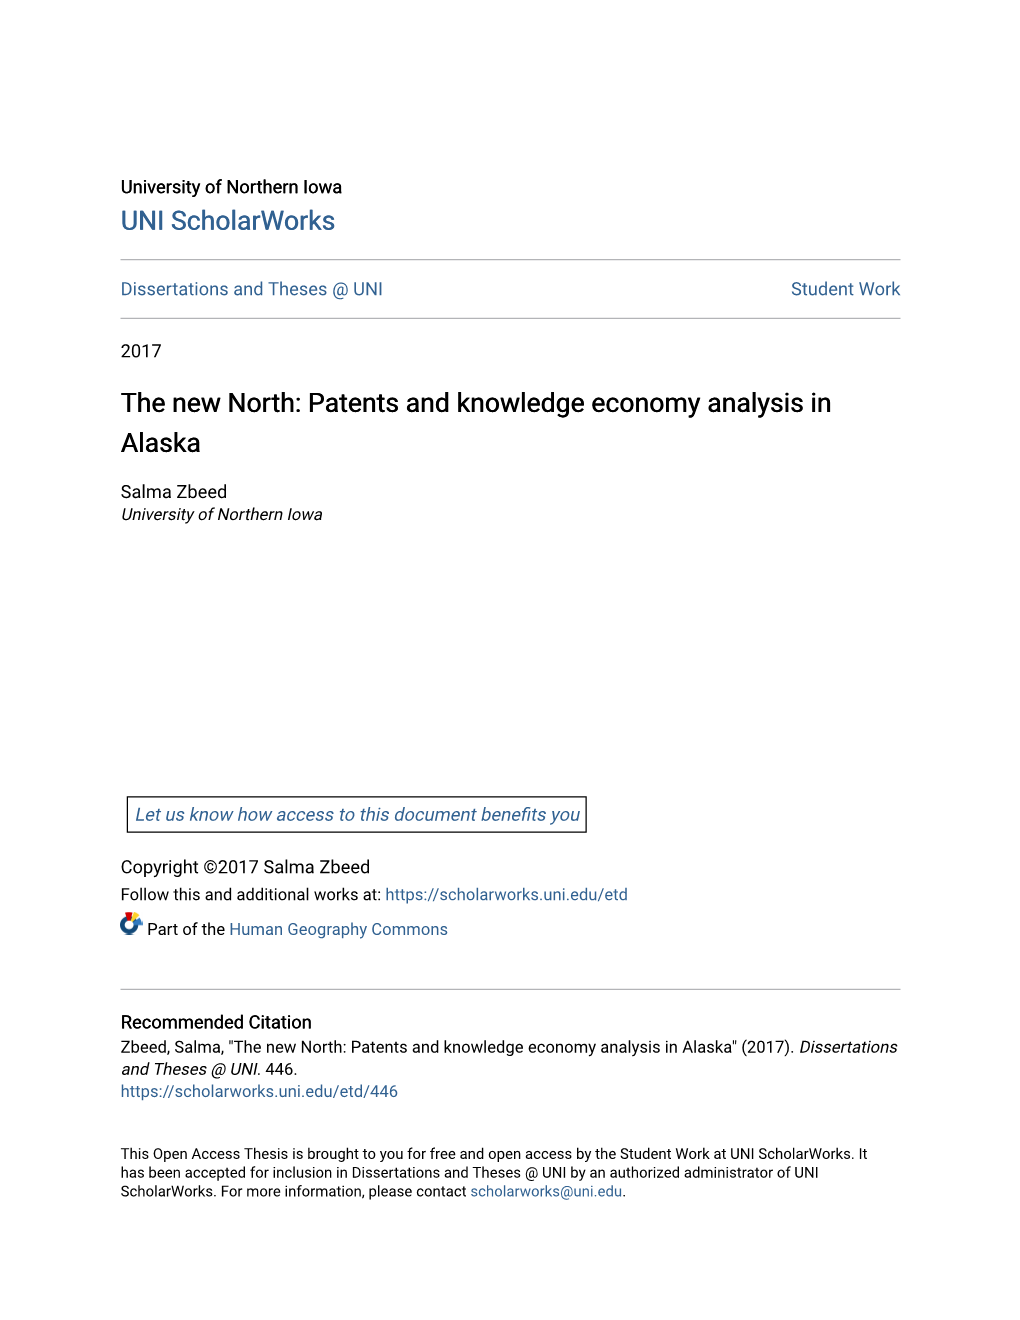 Patents and Knowledge Economy Analysis in Alaska